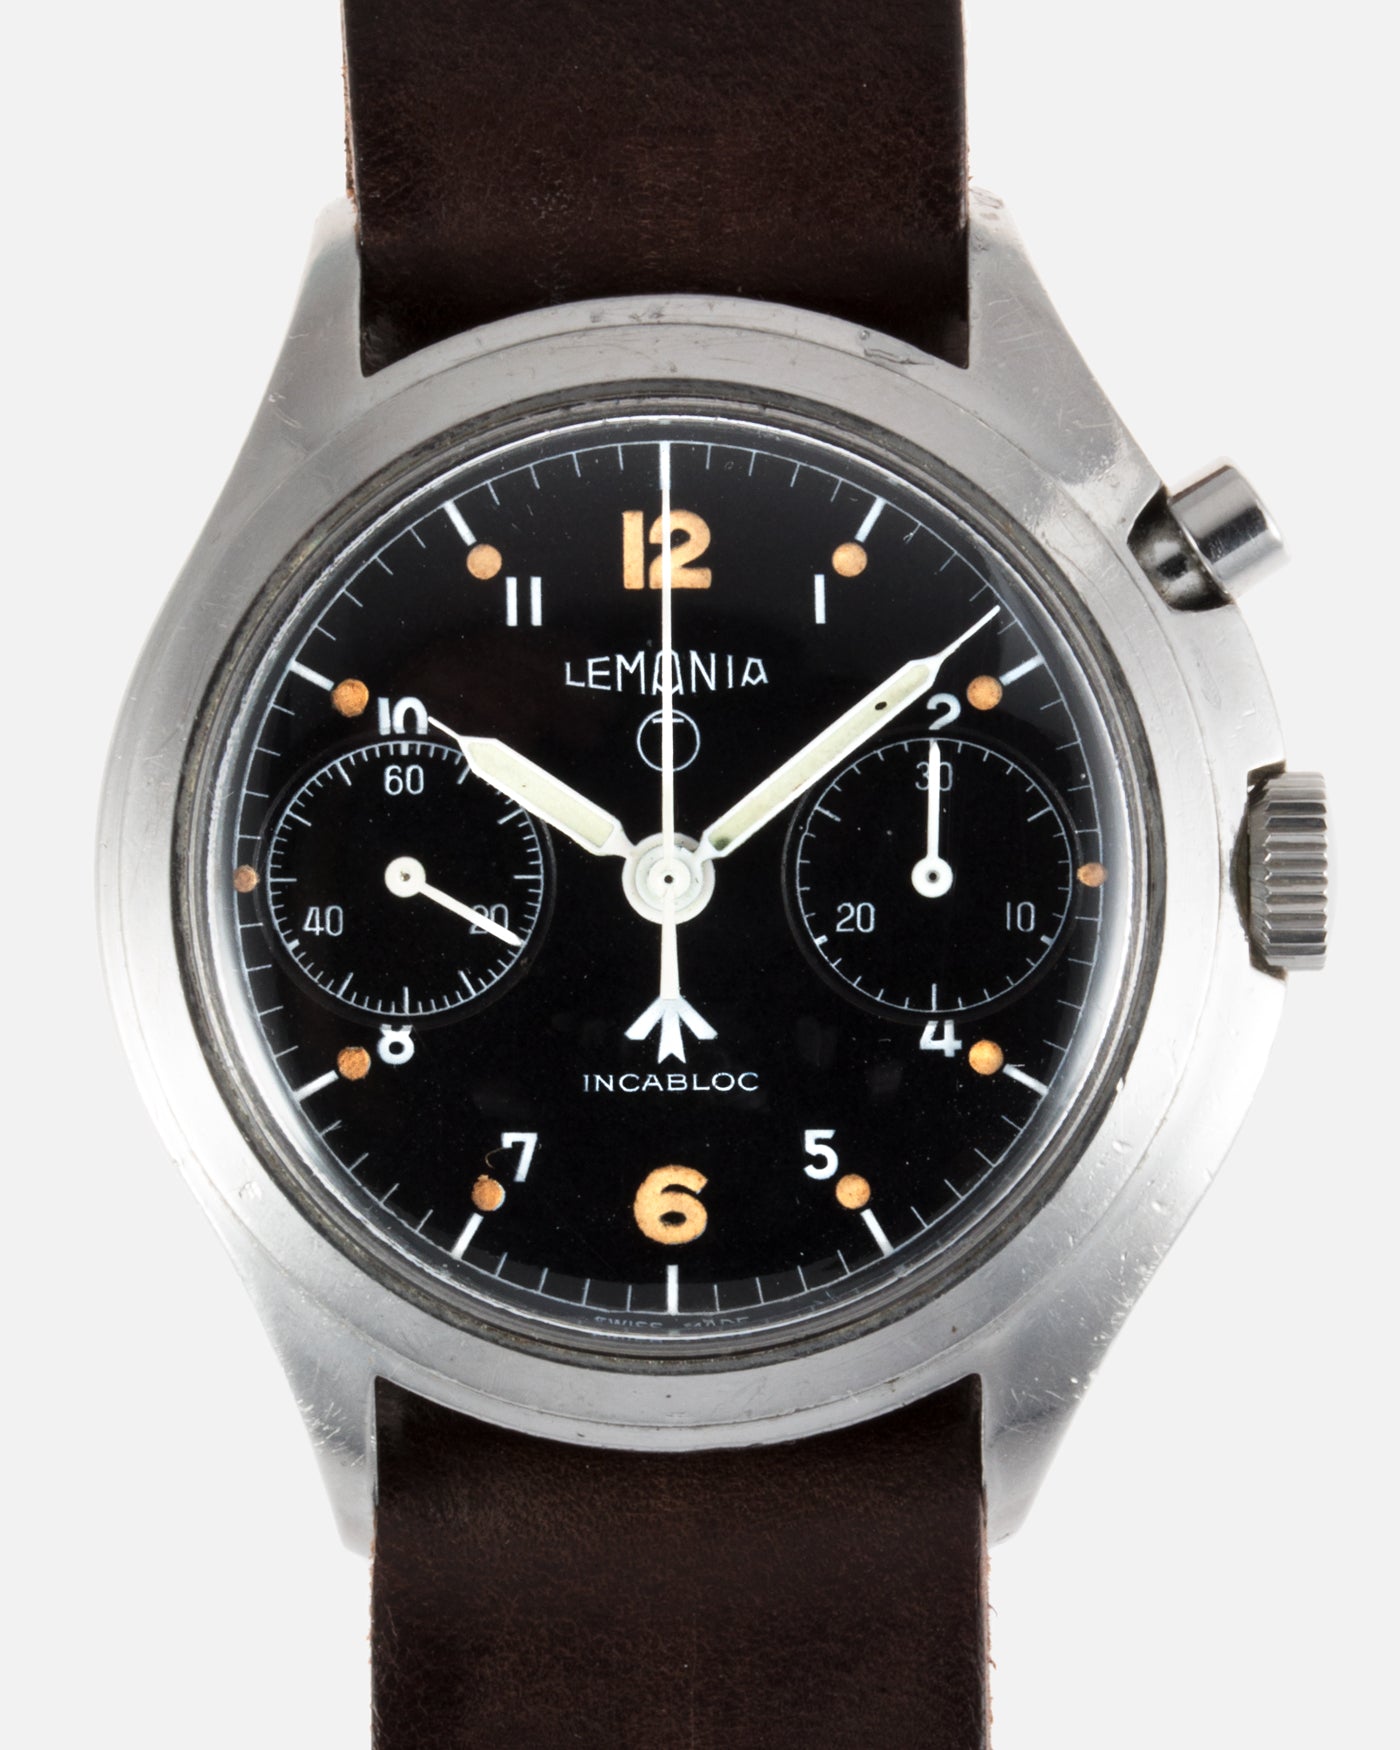 Lemania Royal Air Force Monopusher Series 3 Military Watch | S.Song Vintage Watches For Sale